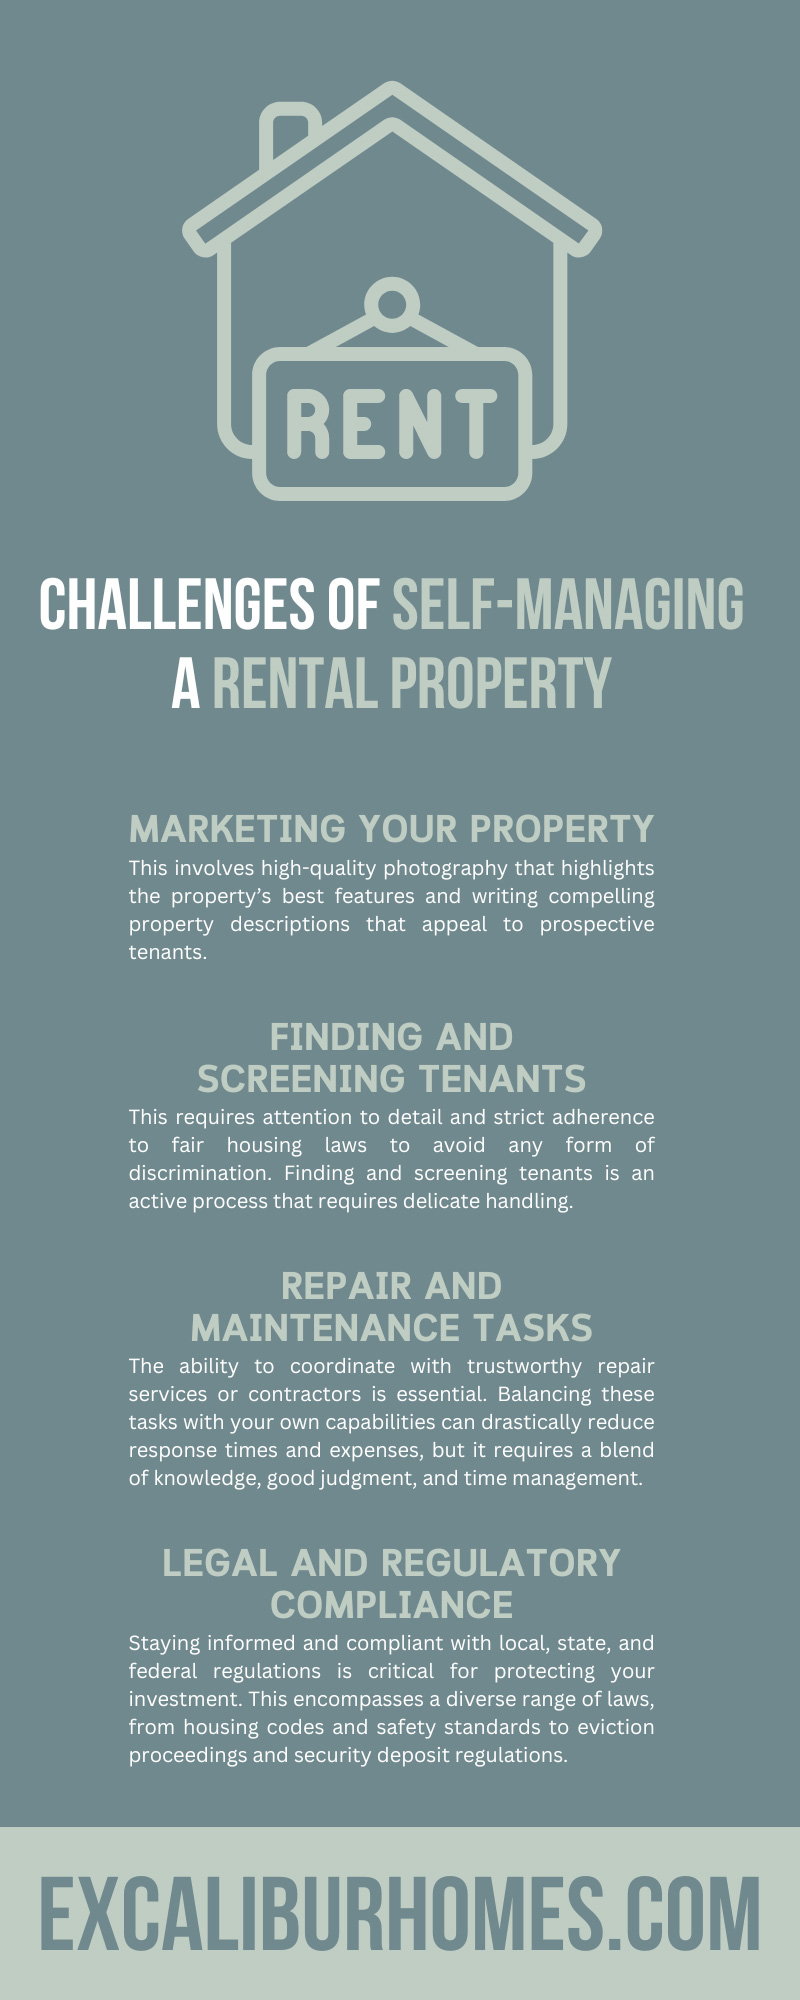 9 Challenges of Self-Managing a Rental Property